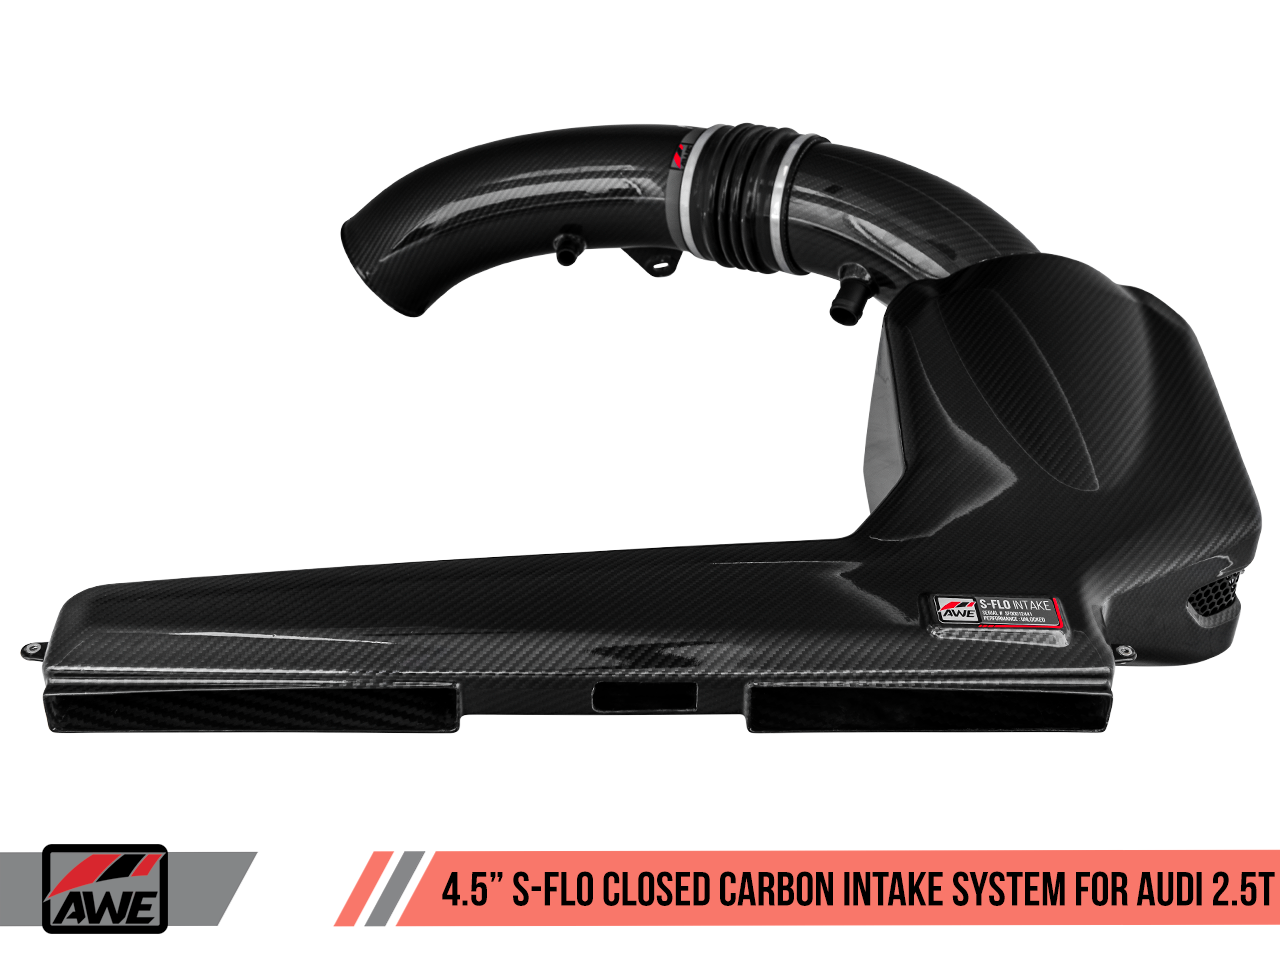 AWE Tuning 4.5" S-FLO Closed Carbon Intake System for Audi RS 3 / TT RS